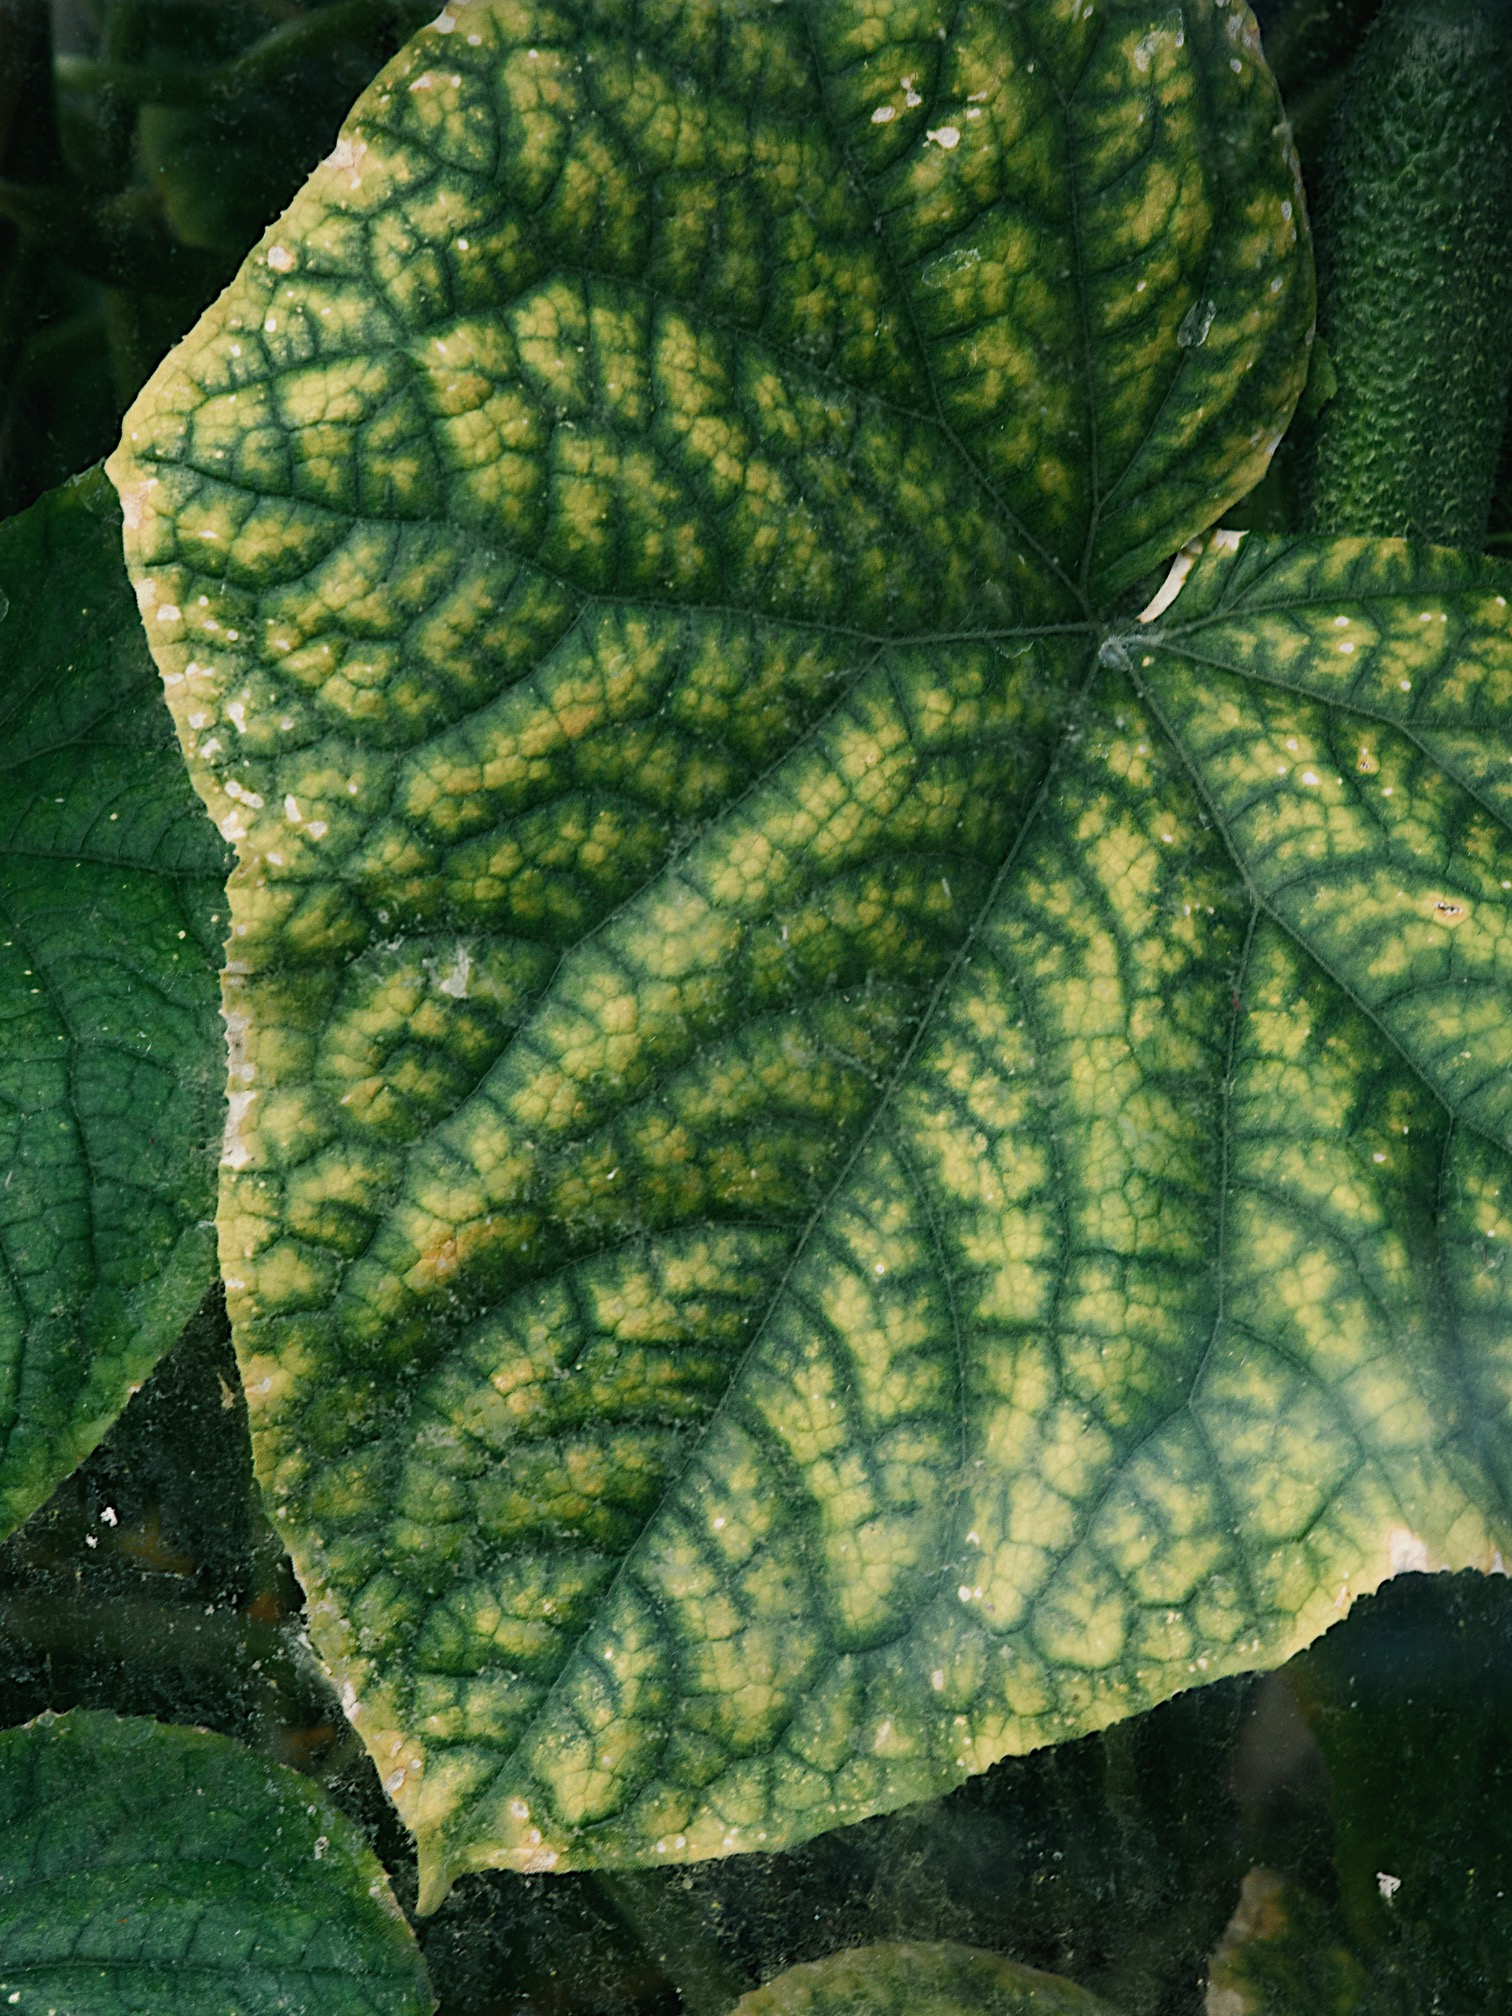 A photo of a cucumber leaf turning yellow from a nutrient deficiency